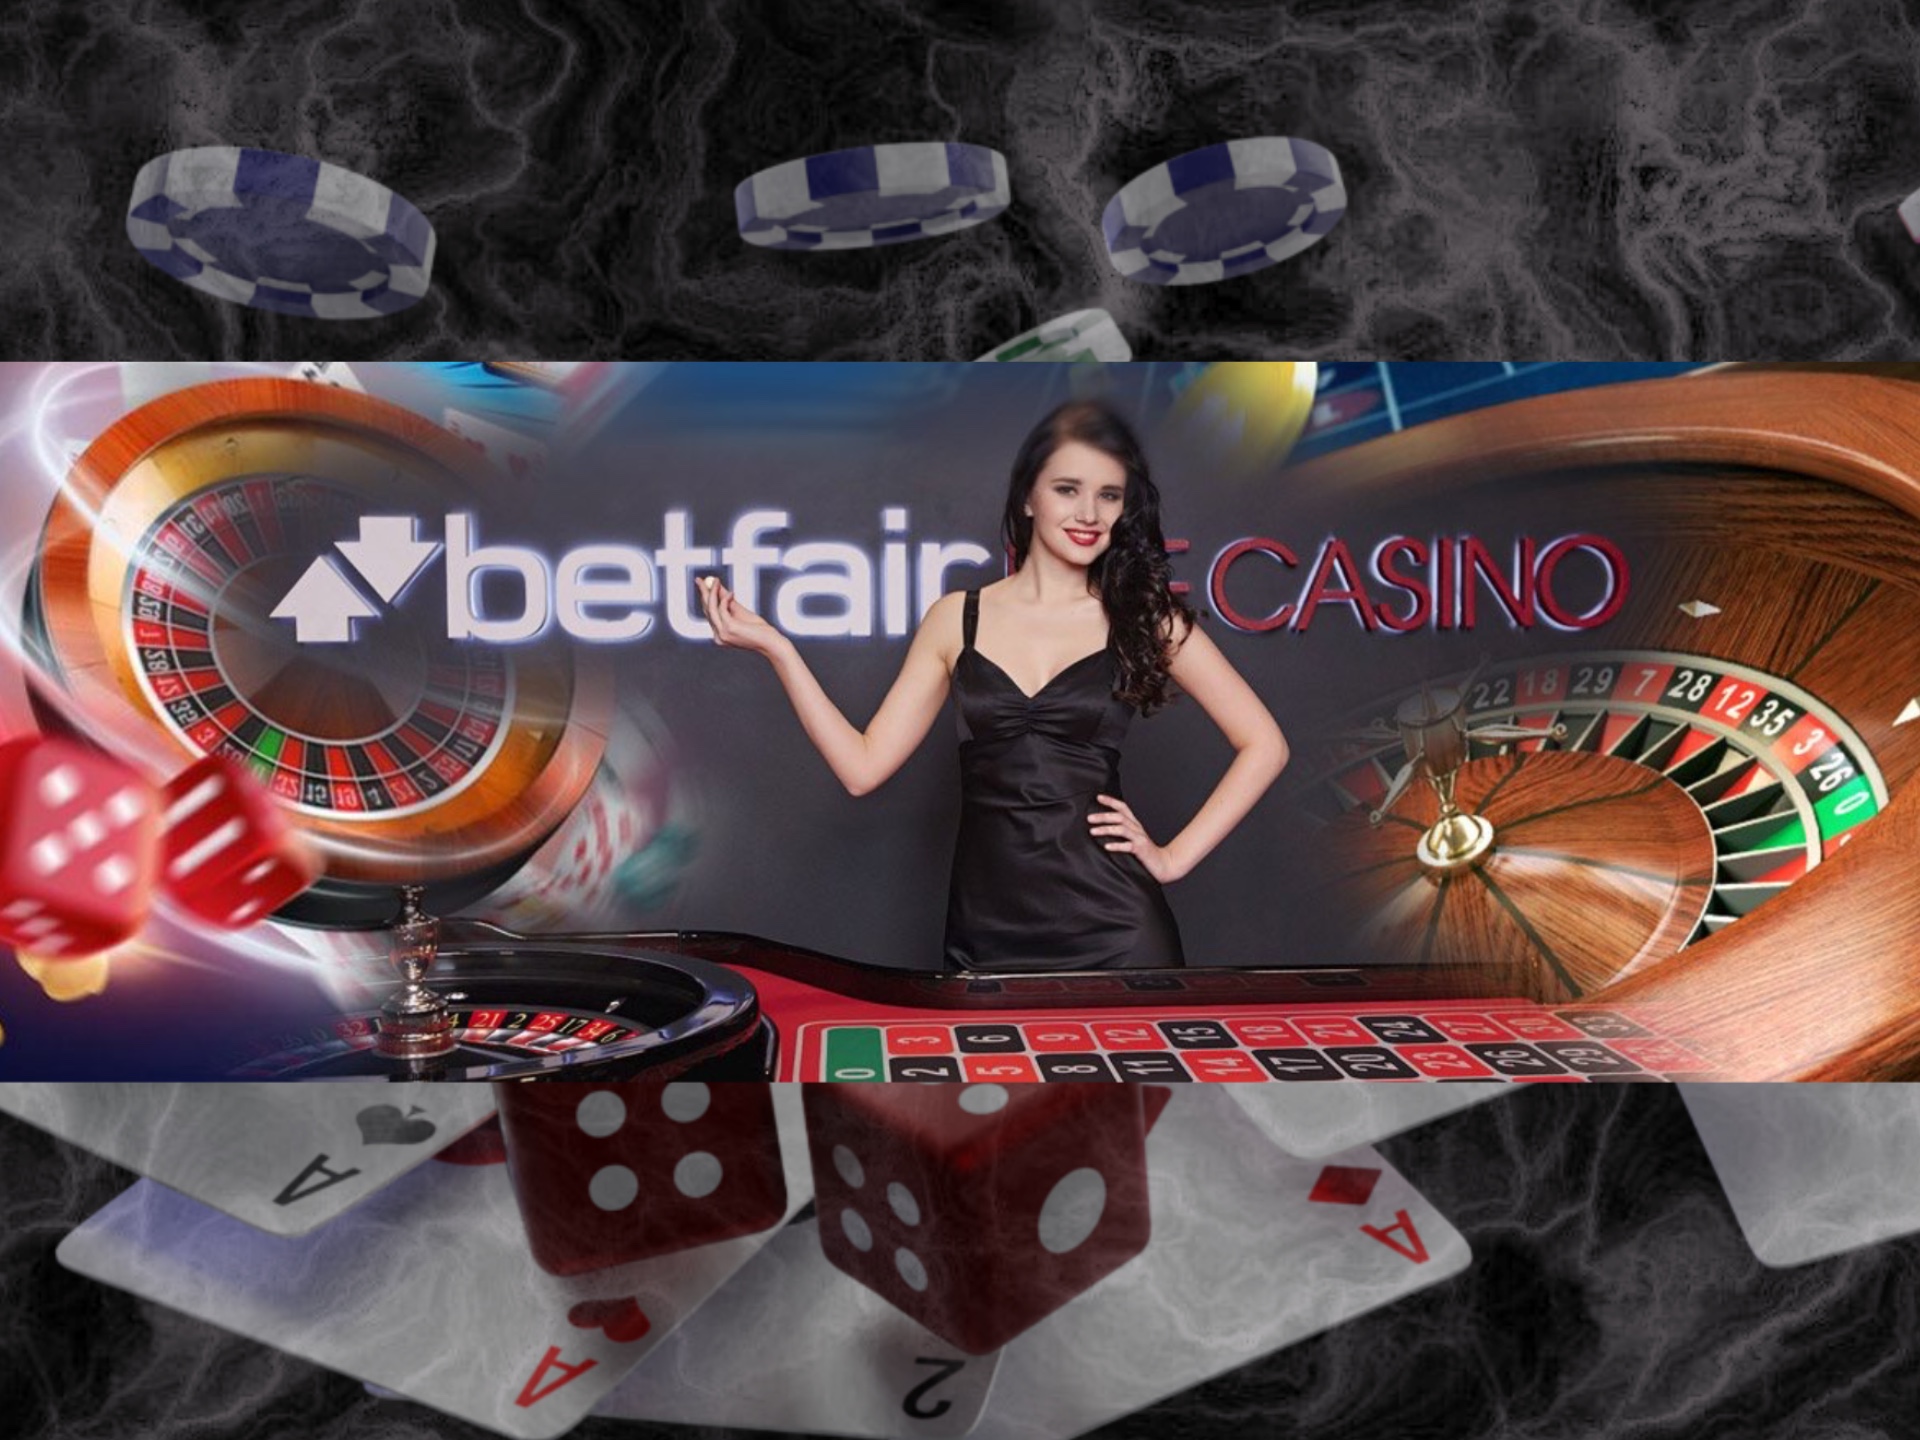 Register at Betfair and play casino games.